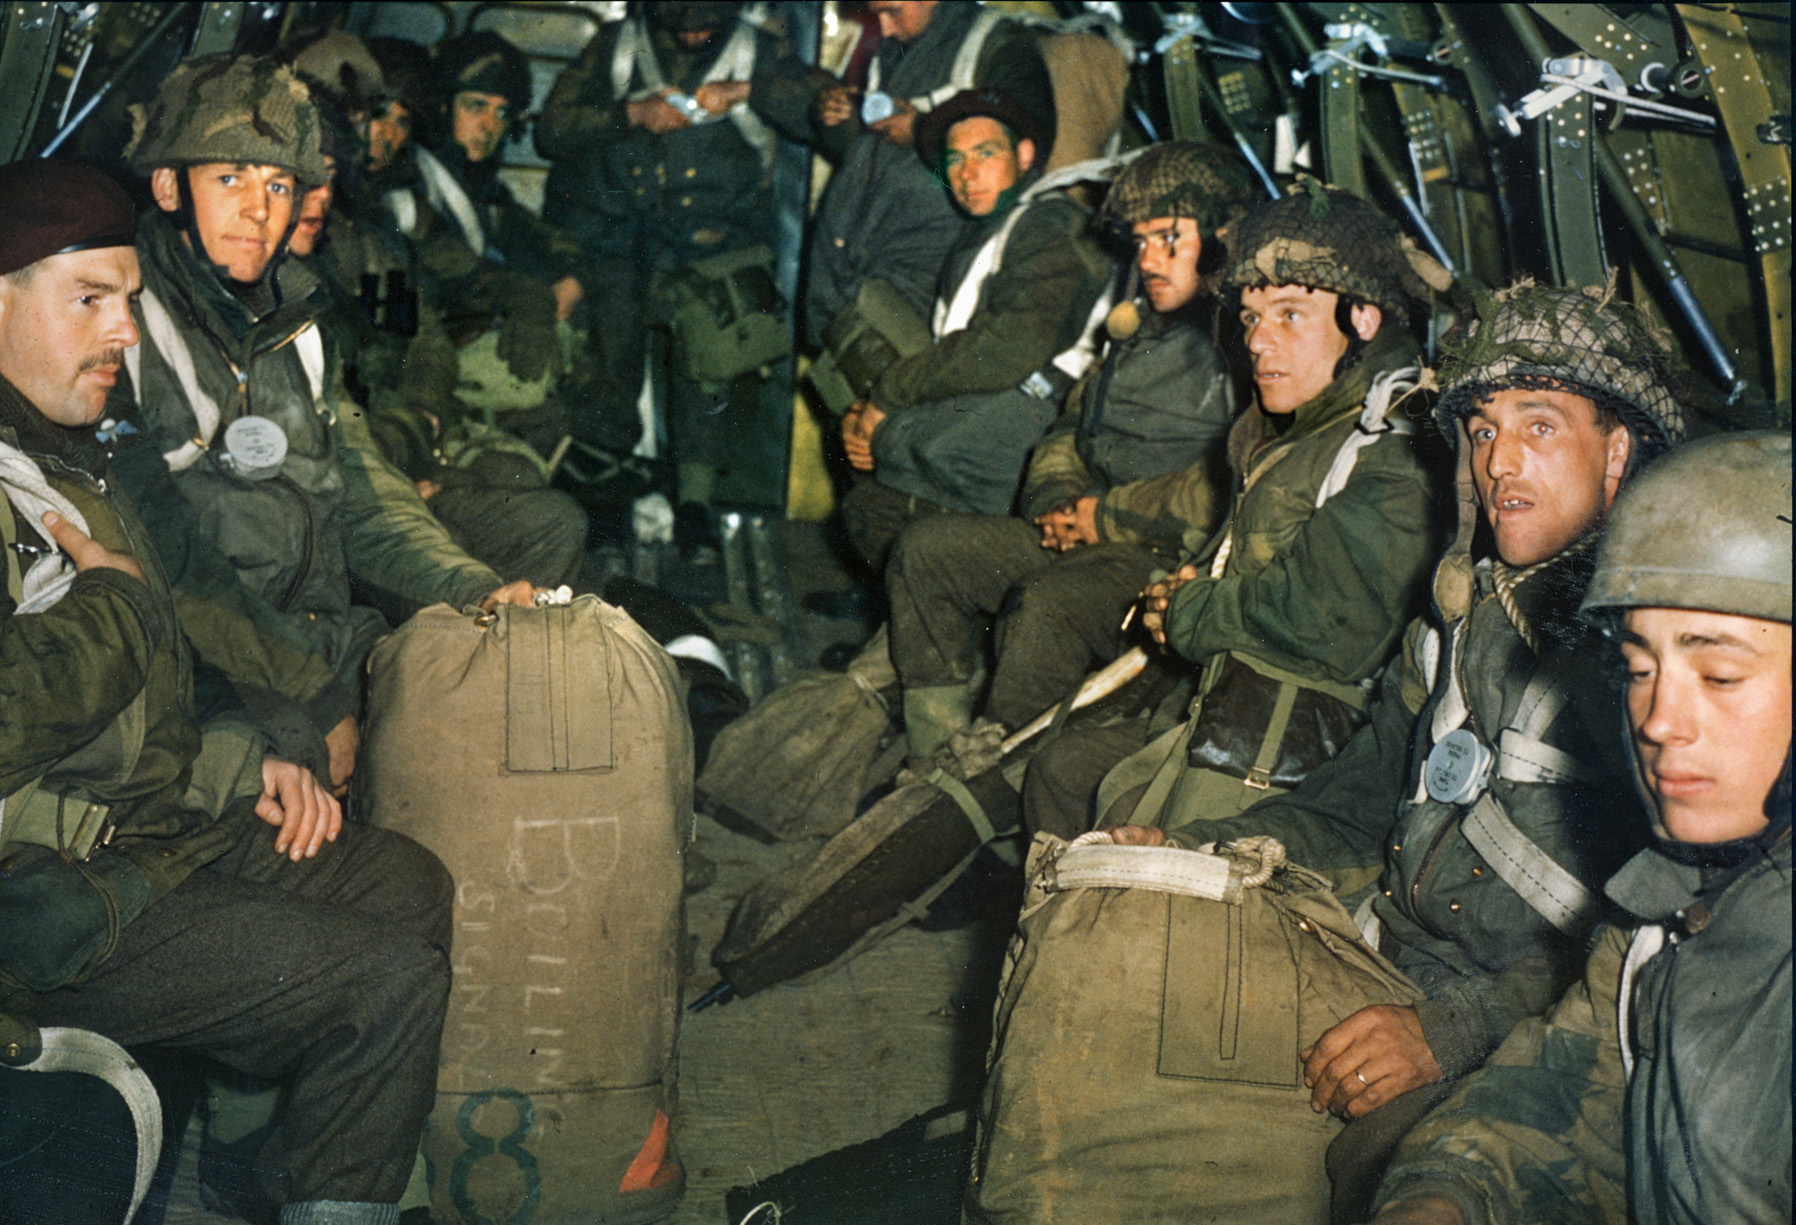 Training for D-Day was intense and continual. Here, heavily laden British paratroopers are packed into an aircraft, ready to make another practice jump. The British used both Albemarles and C-47 Dakotas in training and in combat.